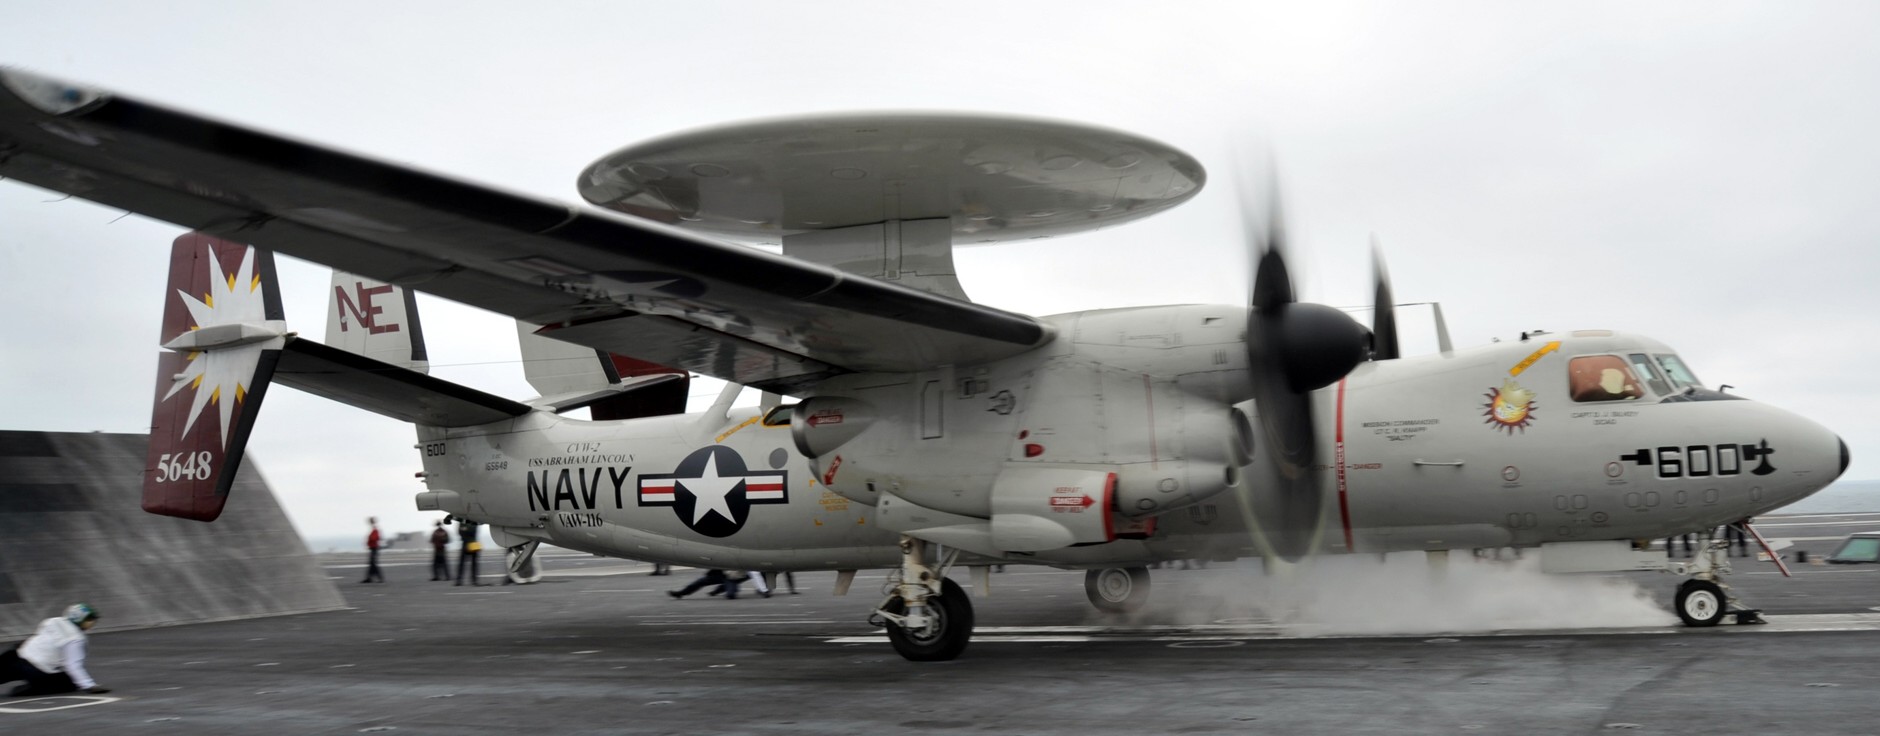 vaw-116 sun kings airborne command control squadron carrier early warning cvw-2 uss abraham lincoln cvn-72 23